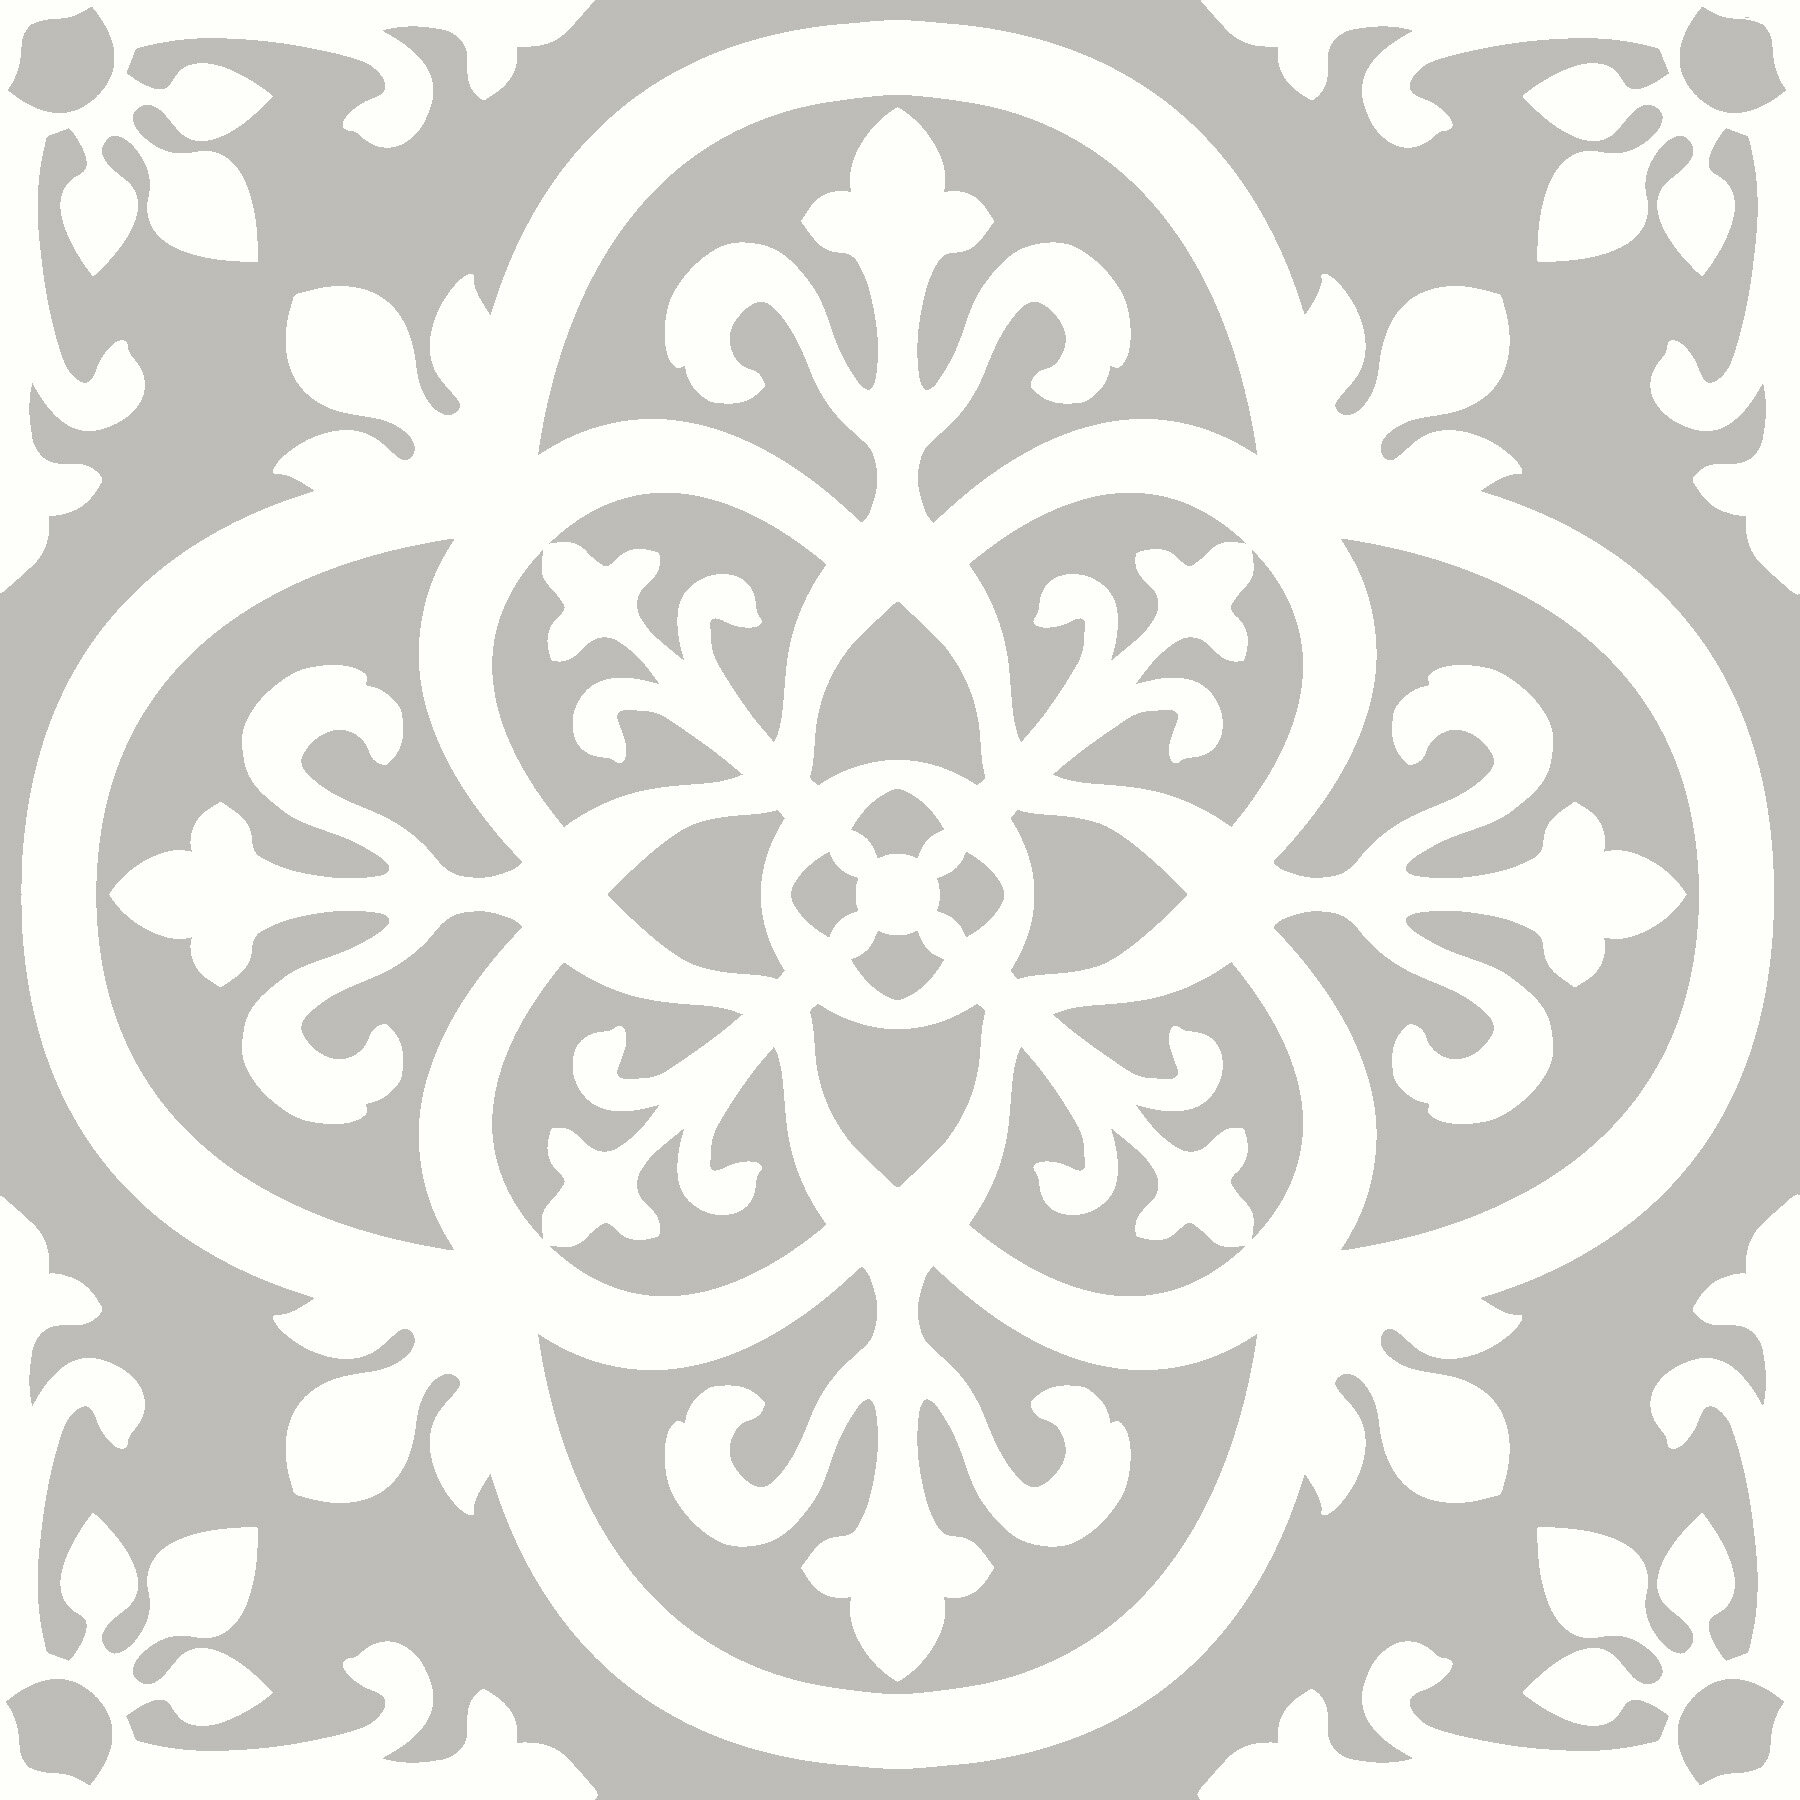 36 Silver Flower Motifs 28 mm flat backed to Sew or Glue on card or fabric